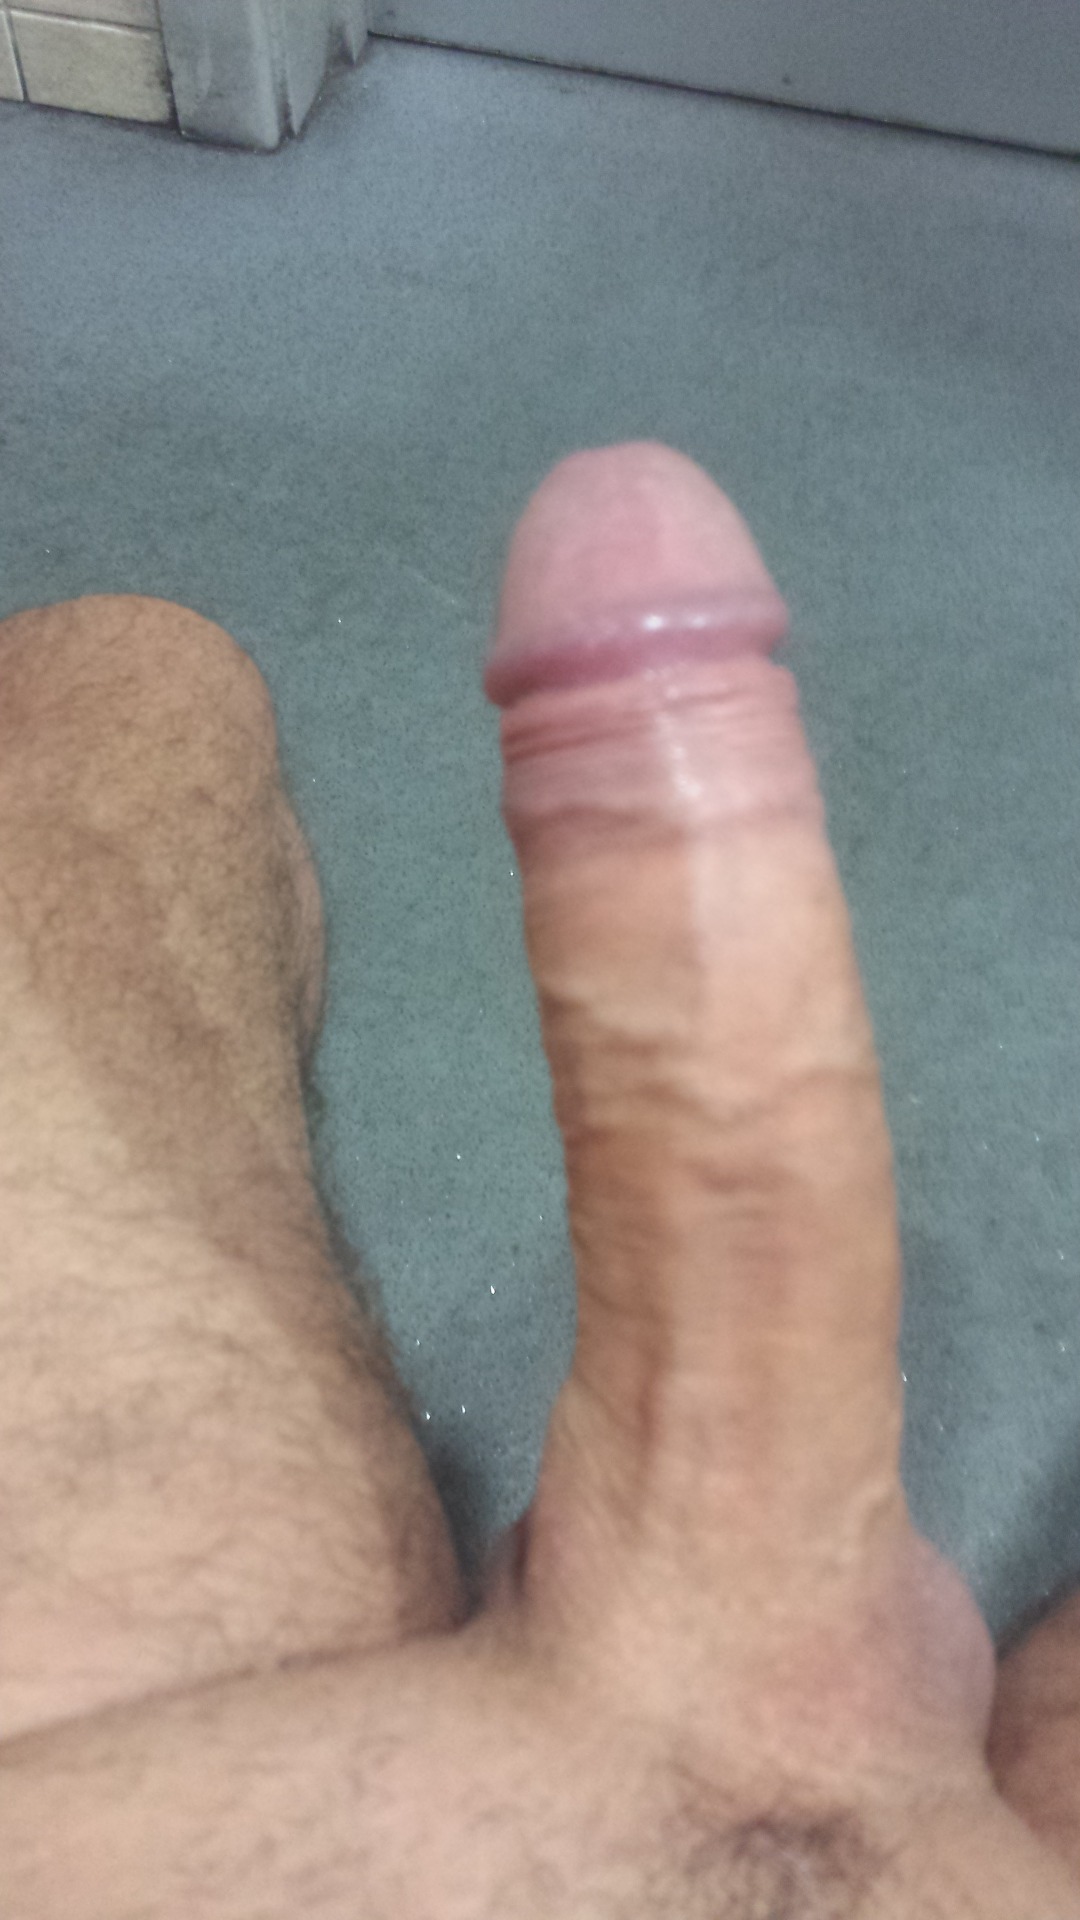 Submission what do you think? Big, bigger, huge, massive or enormous?